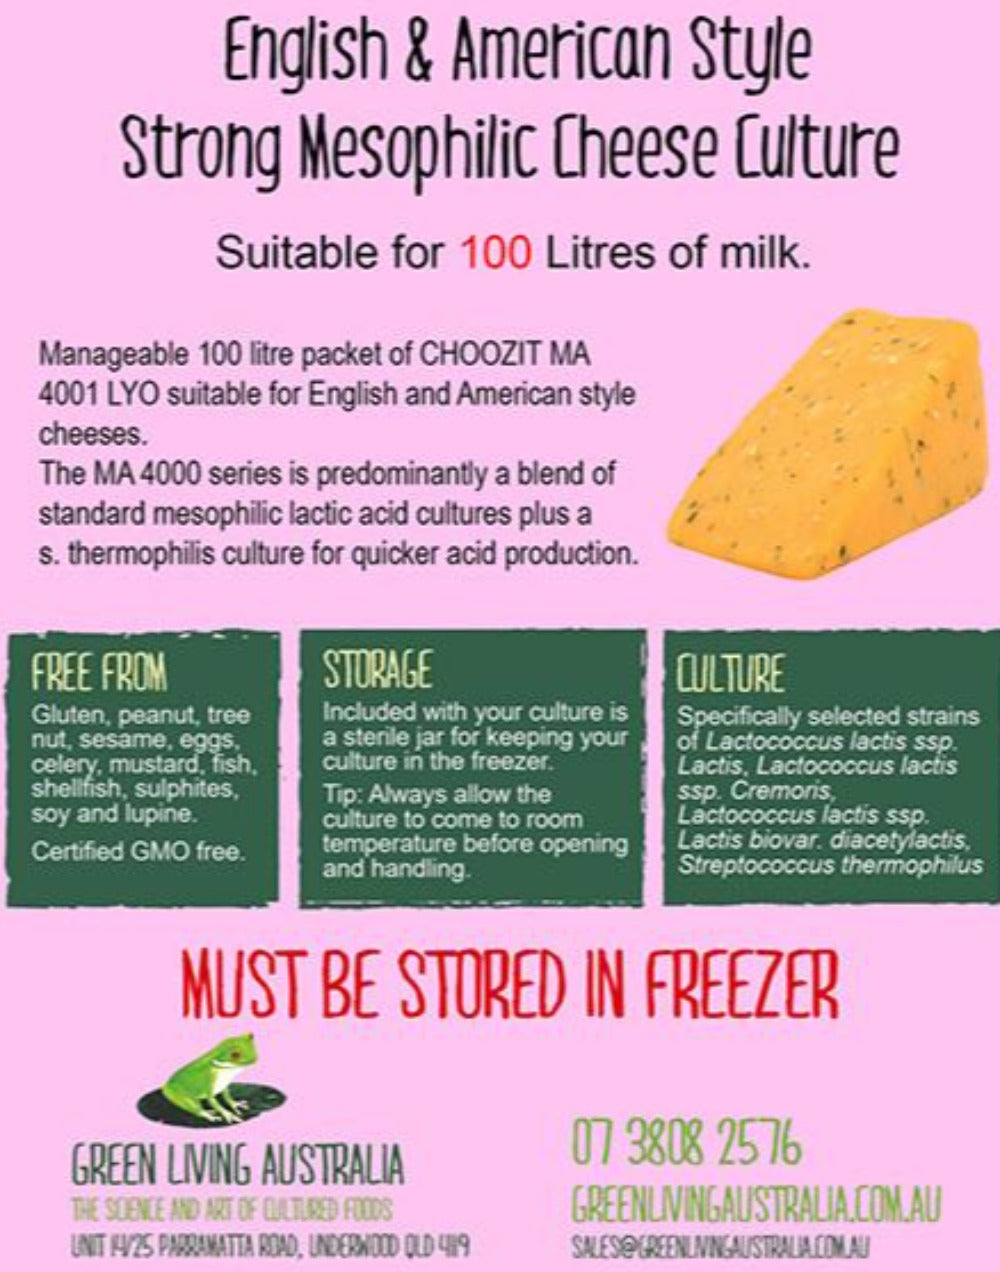 English & American Style Strong Mesophilic Cheese